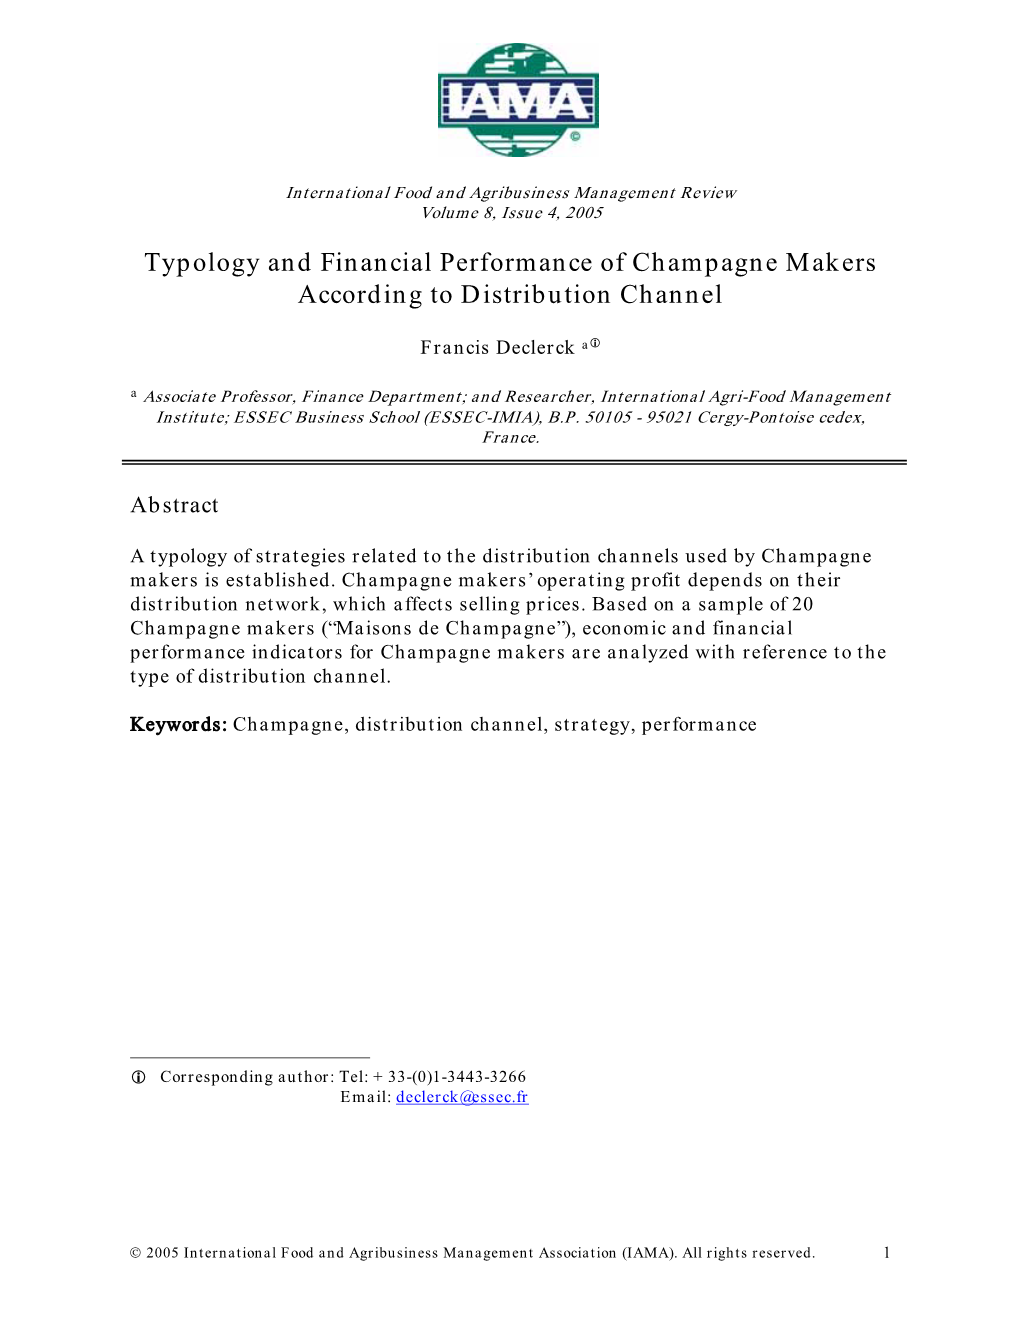 Typology and Financial Performance of Champagne Makers According to Distribution Channel